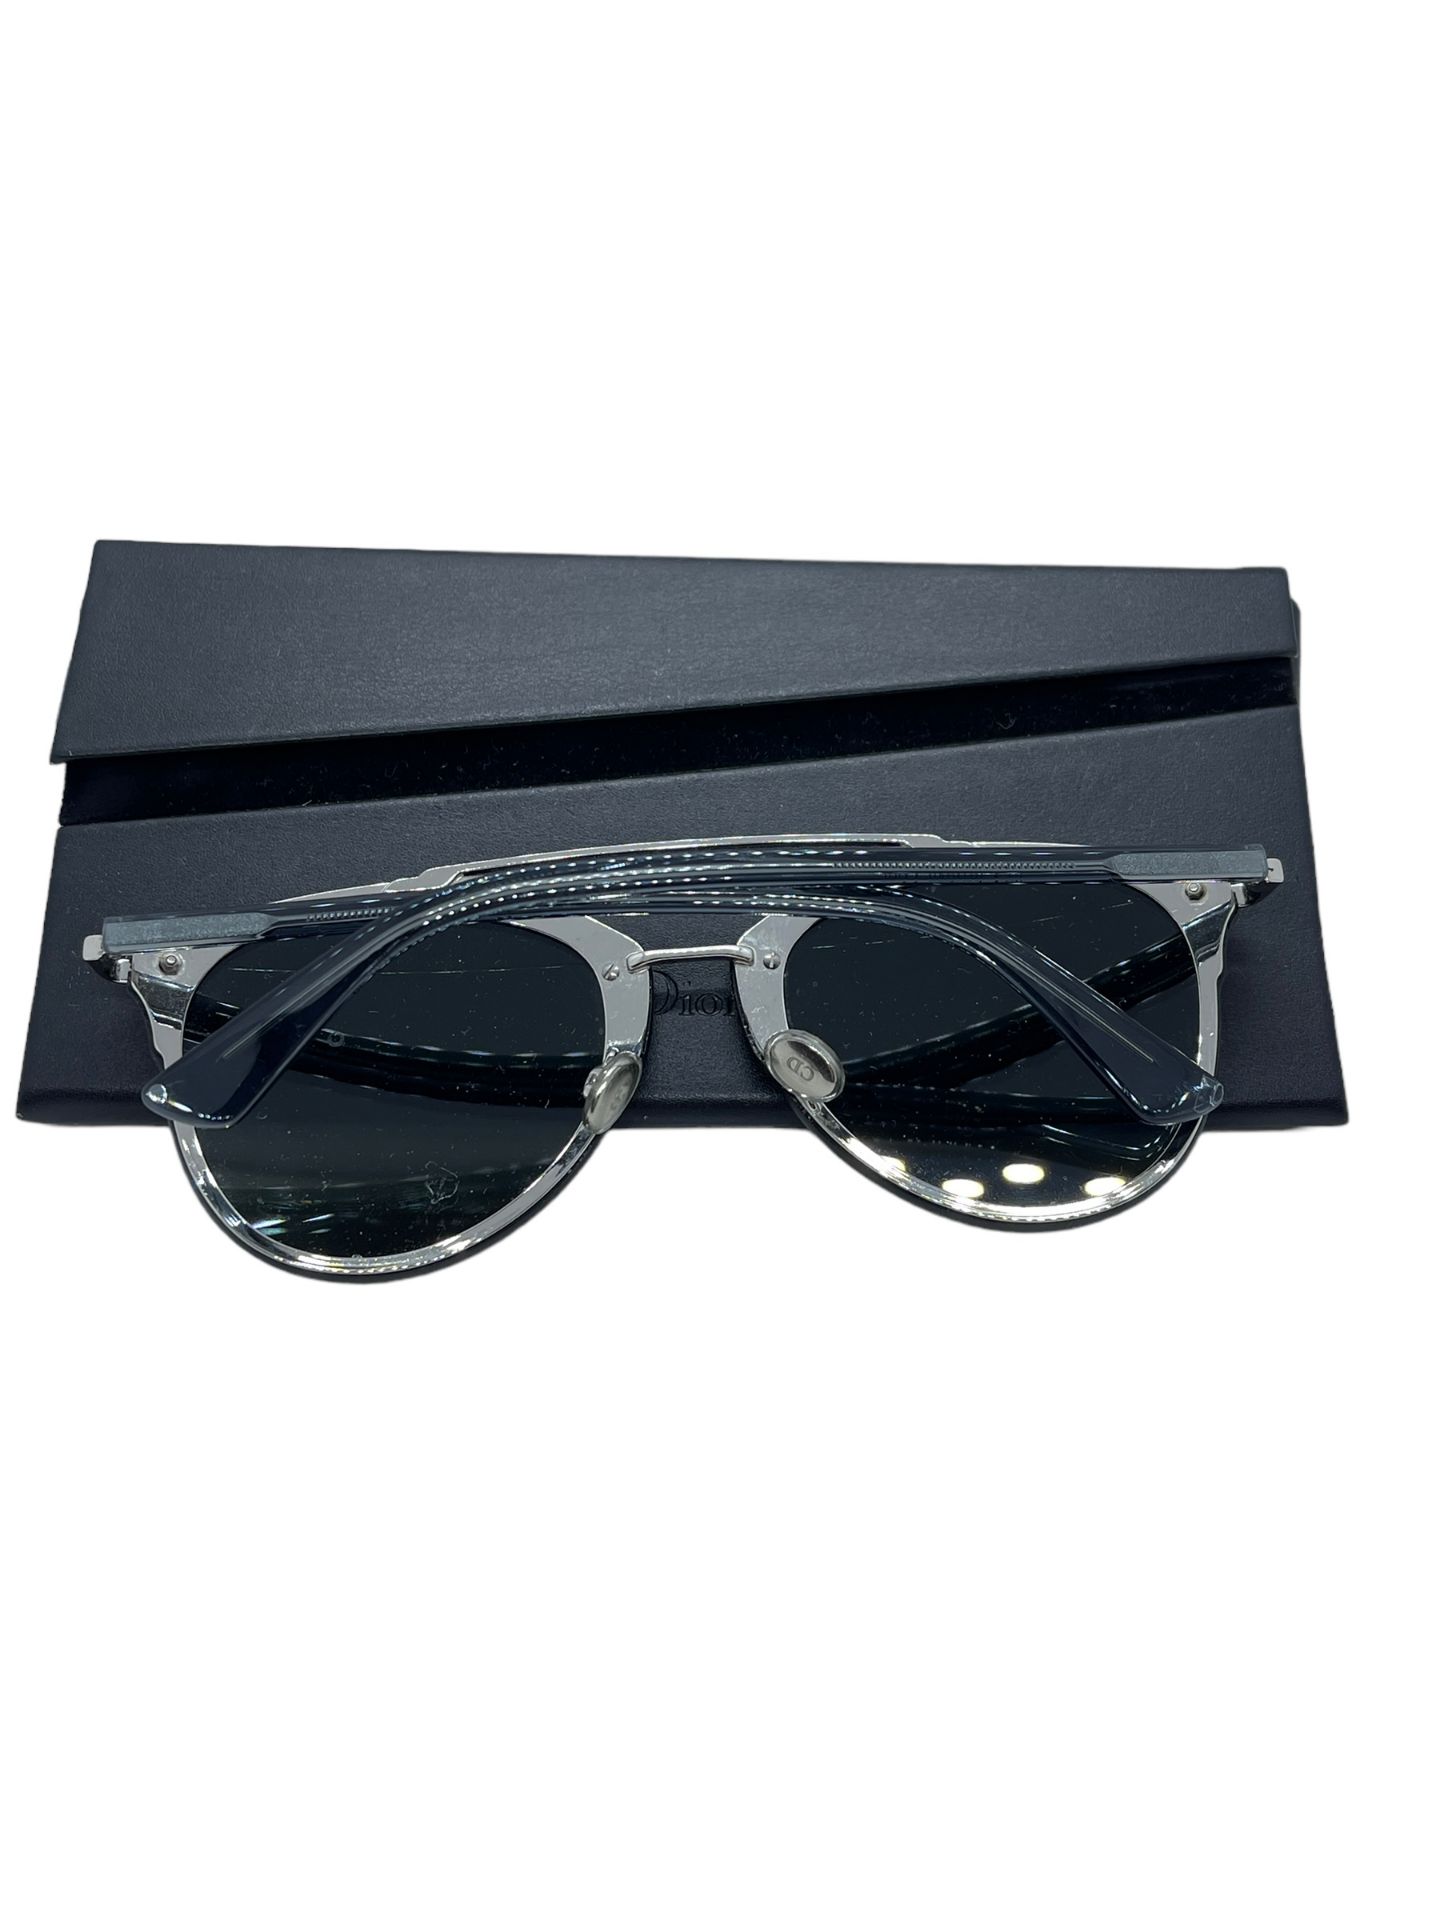 DIOR UNISEX SUNGLASSES XDEMO WITH BCASE PAPER ECT - Image 3 of 6